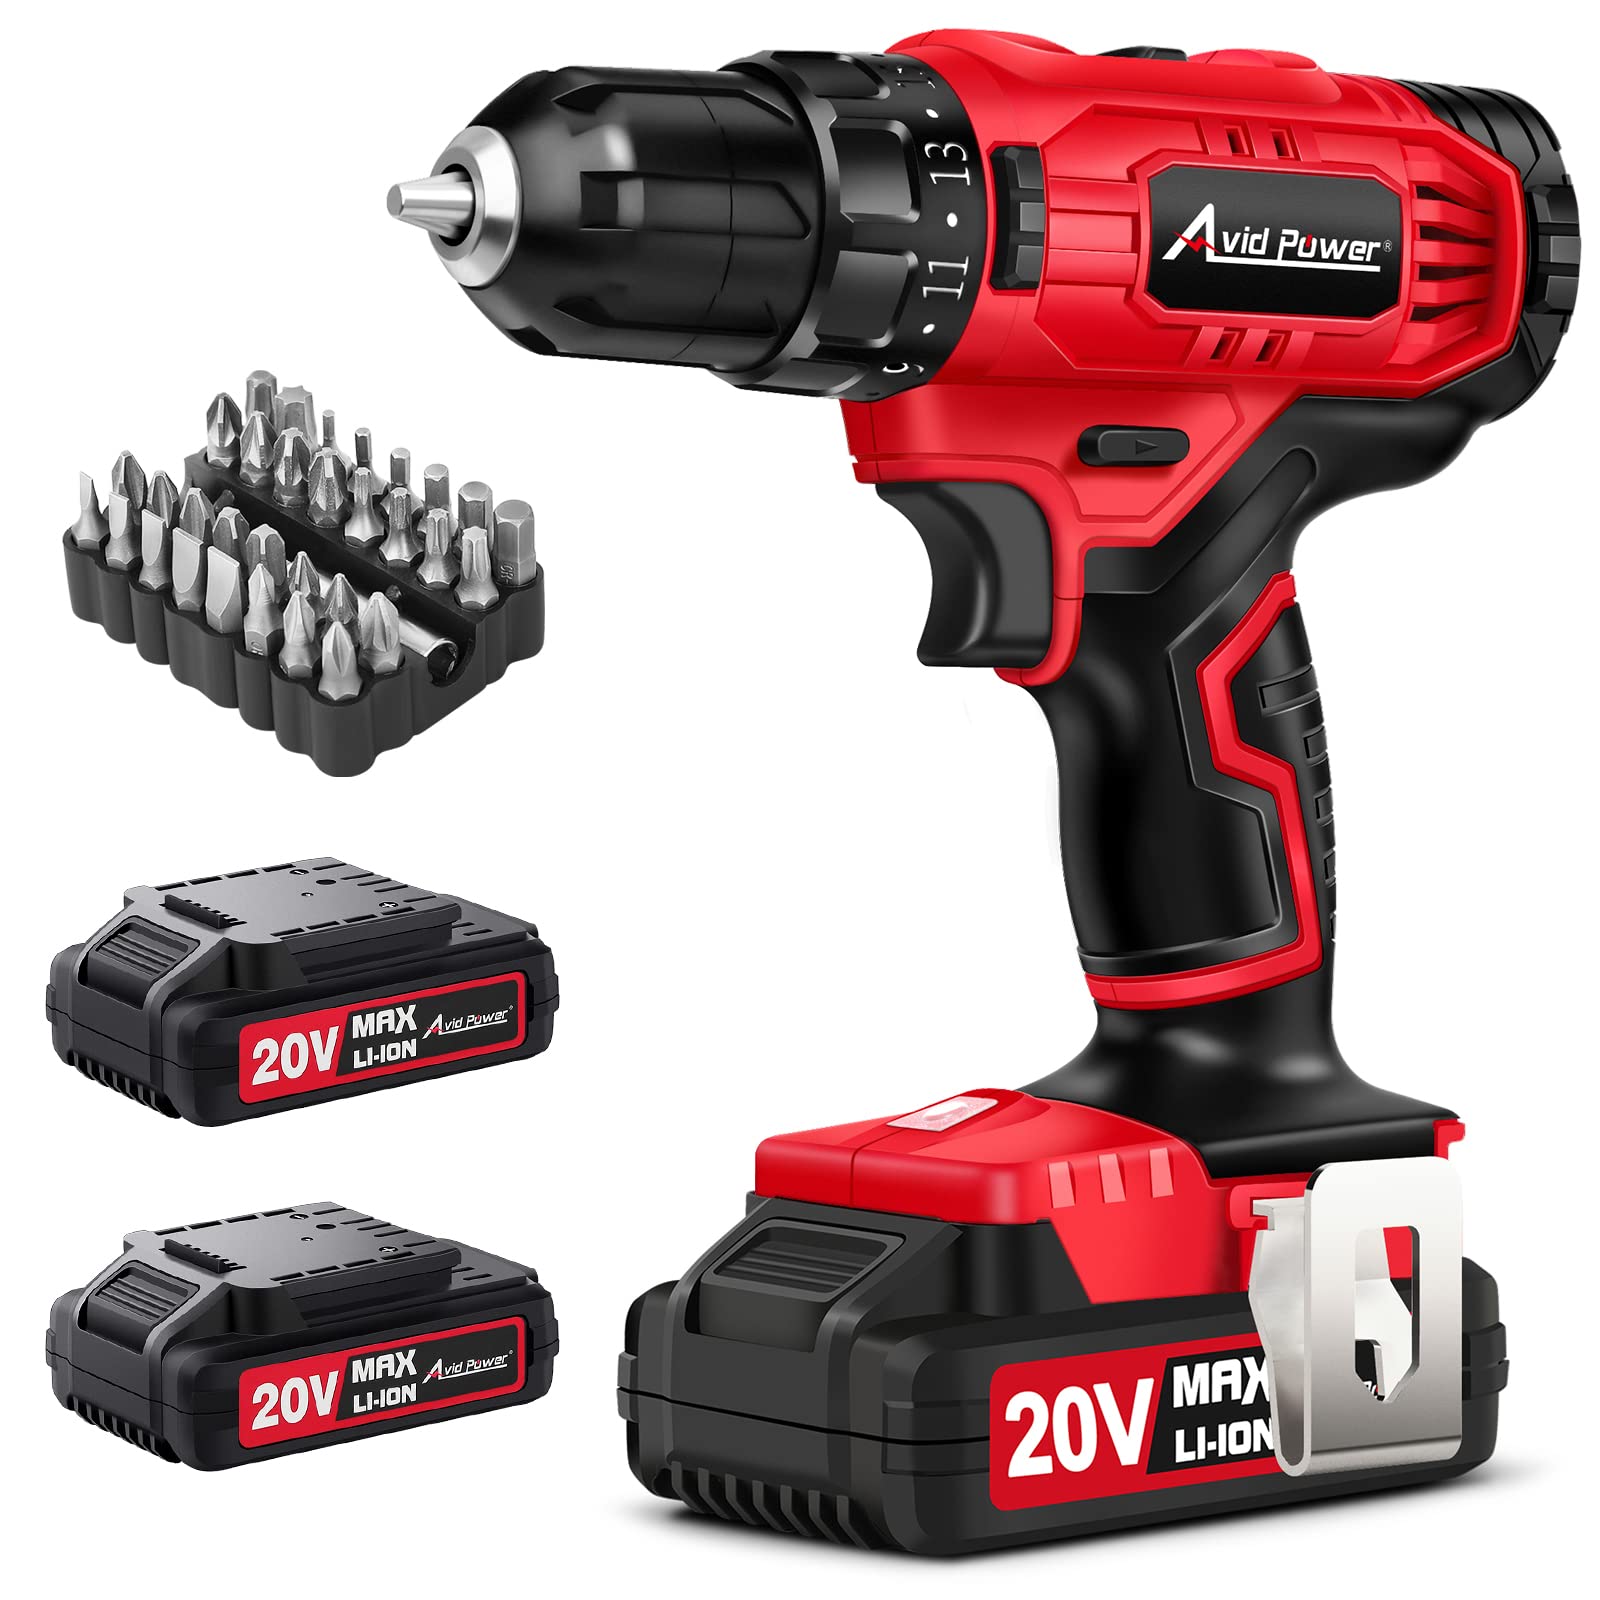 AVID POWER Cordless Drill Set 20V Power DrillScrewdriver with 2 Batteries and 35pcs Accessories 320 In-lbs Torque 2 Variab